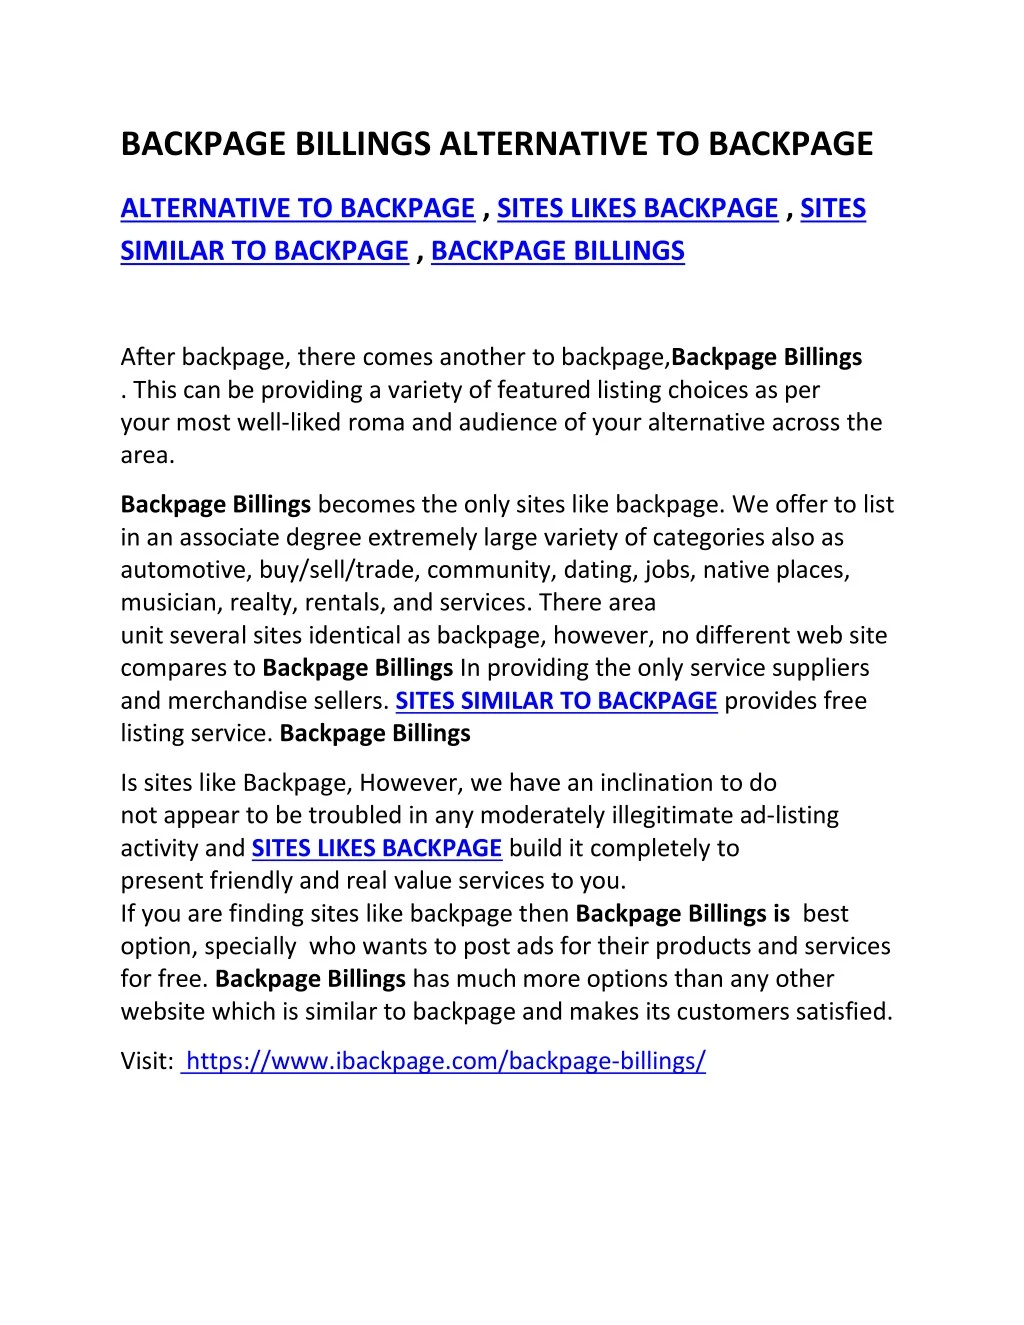 backpage billings alternative to backpage